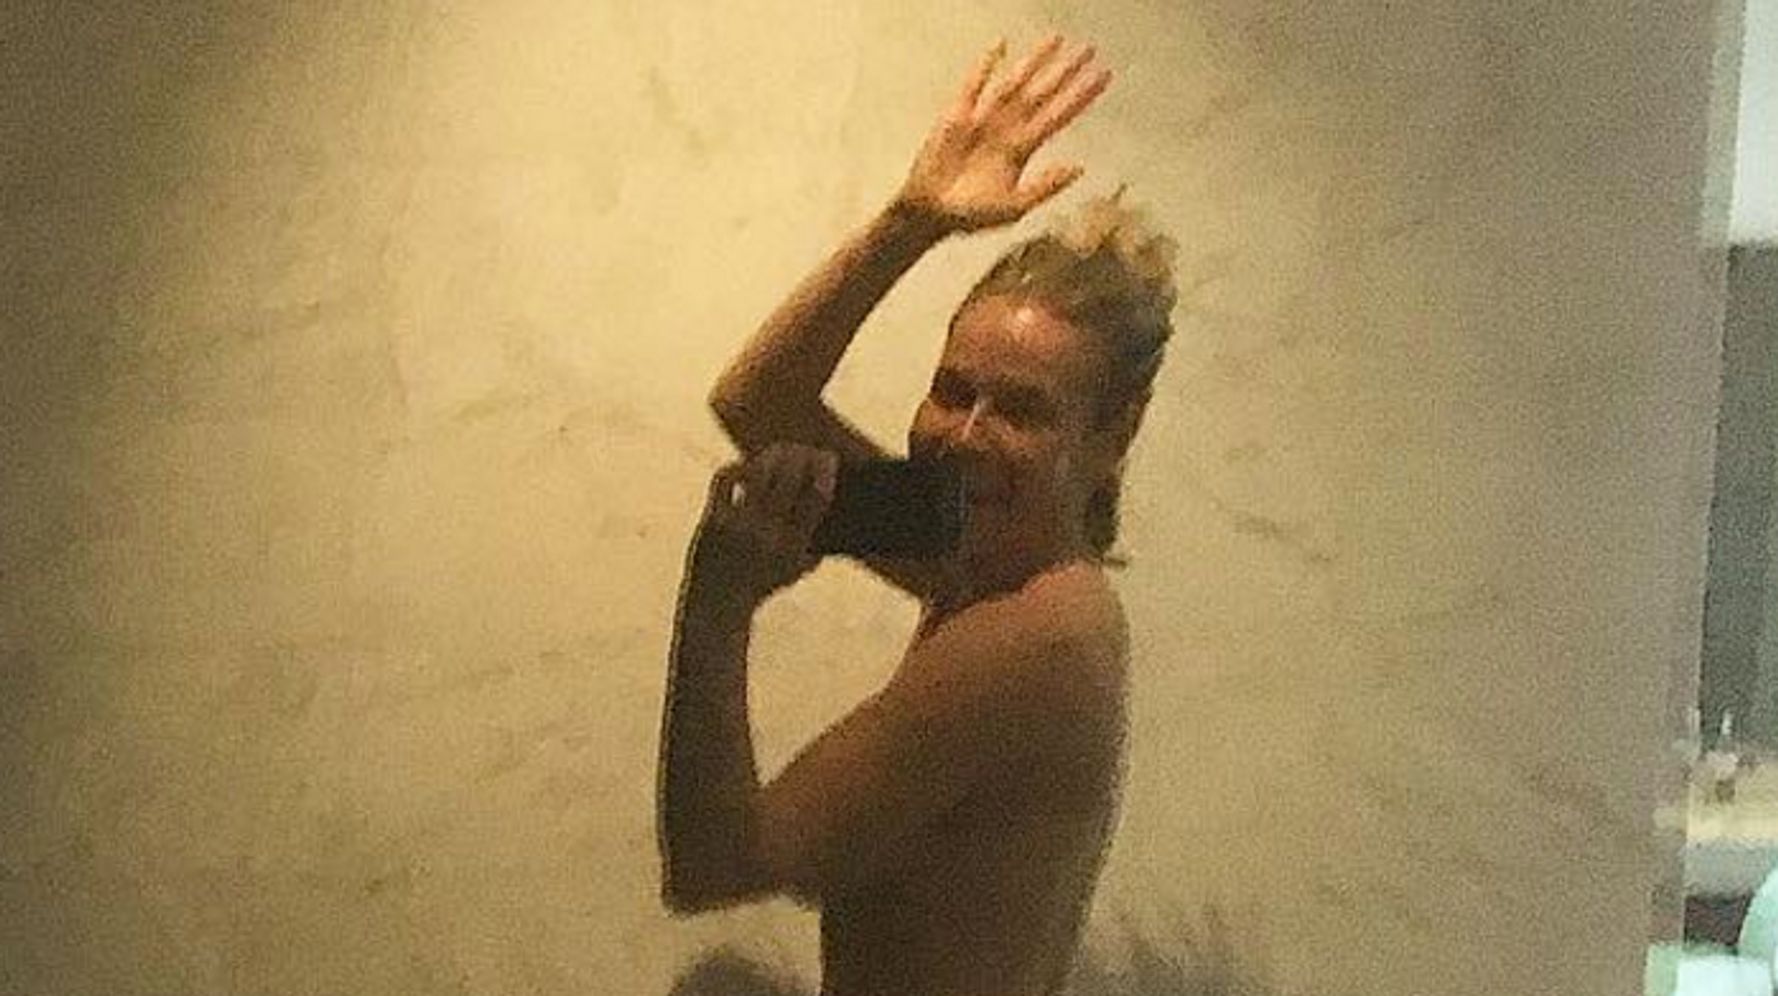 Chelsea Handler Gets 'Artsy' With Her Latest Nude Photo On I